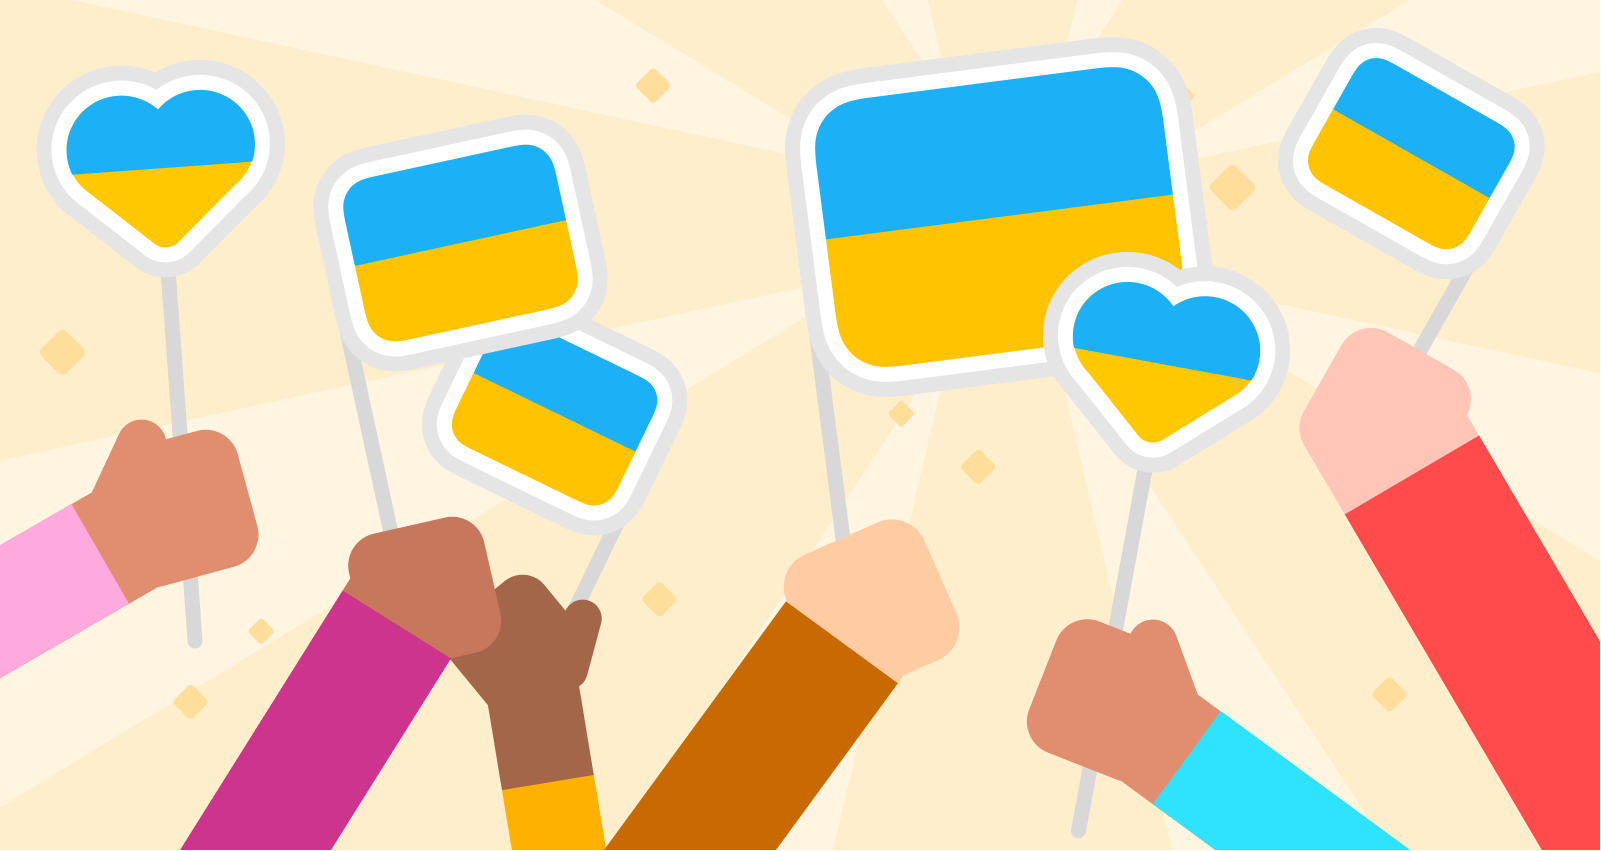 Illustration of seven hands holding seven Ukrainian flags. Some flags are the typical rectangles and others are hearts. The hands are a variety of skin tones and their shirt sleeves are different colors. There is a faint sunburst and sparkles coming from behind the flags.